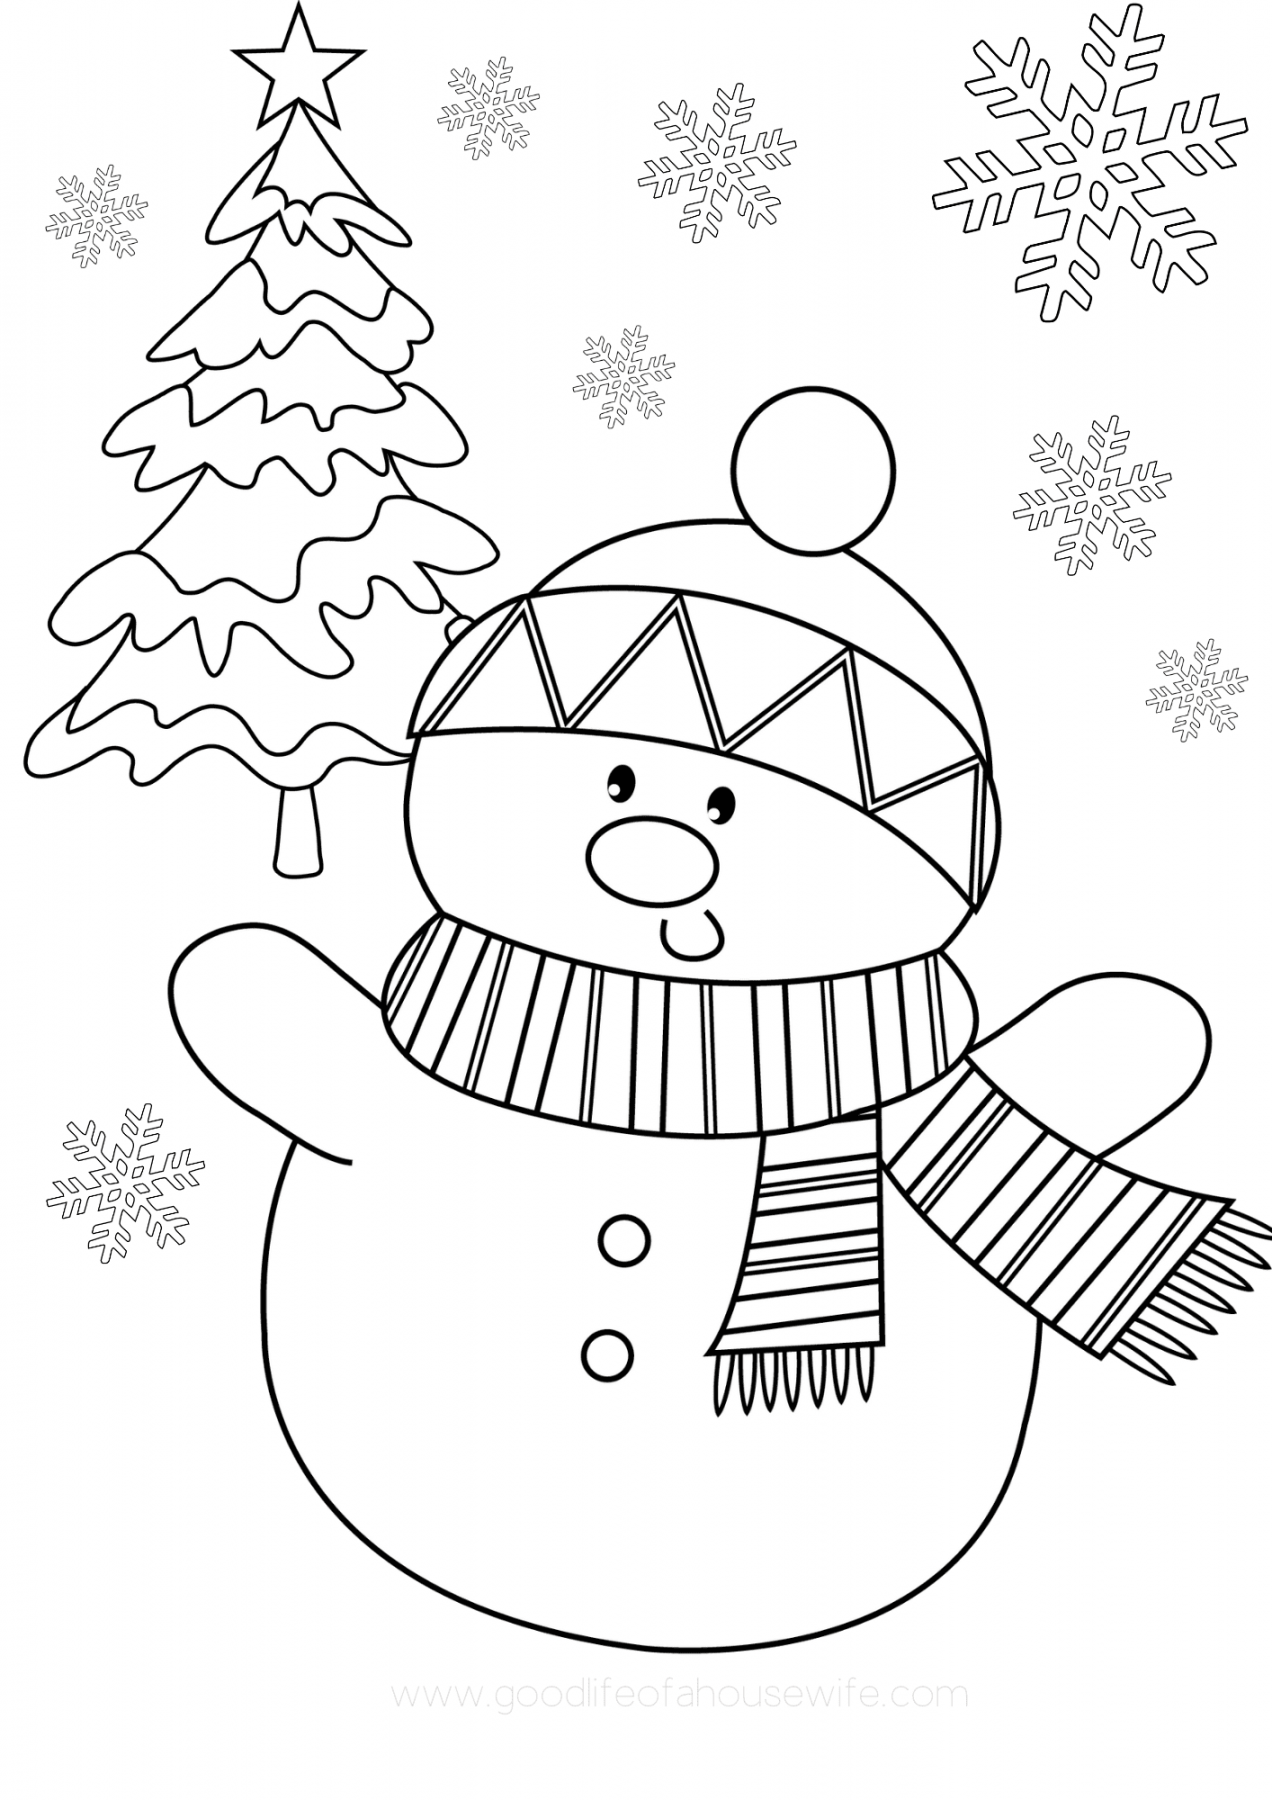 Free Christmas Printable Coloring Pages - Printable - Free Printable Christmas Coloring Pages - Good Life of a Housewife